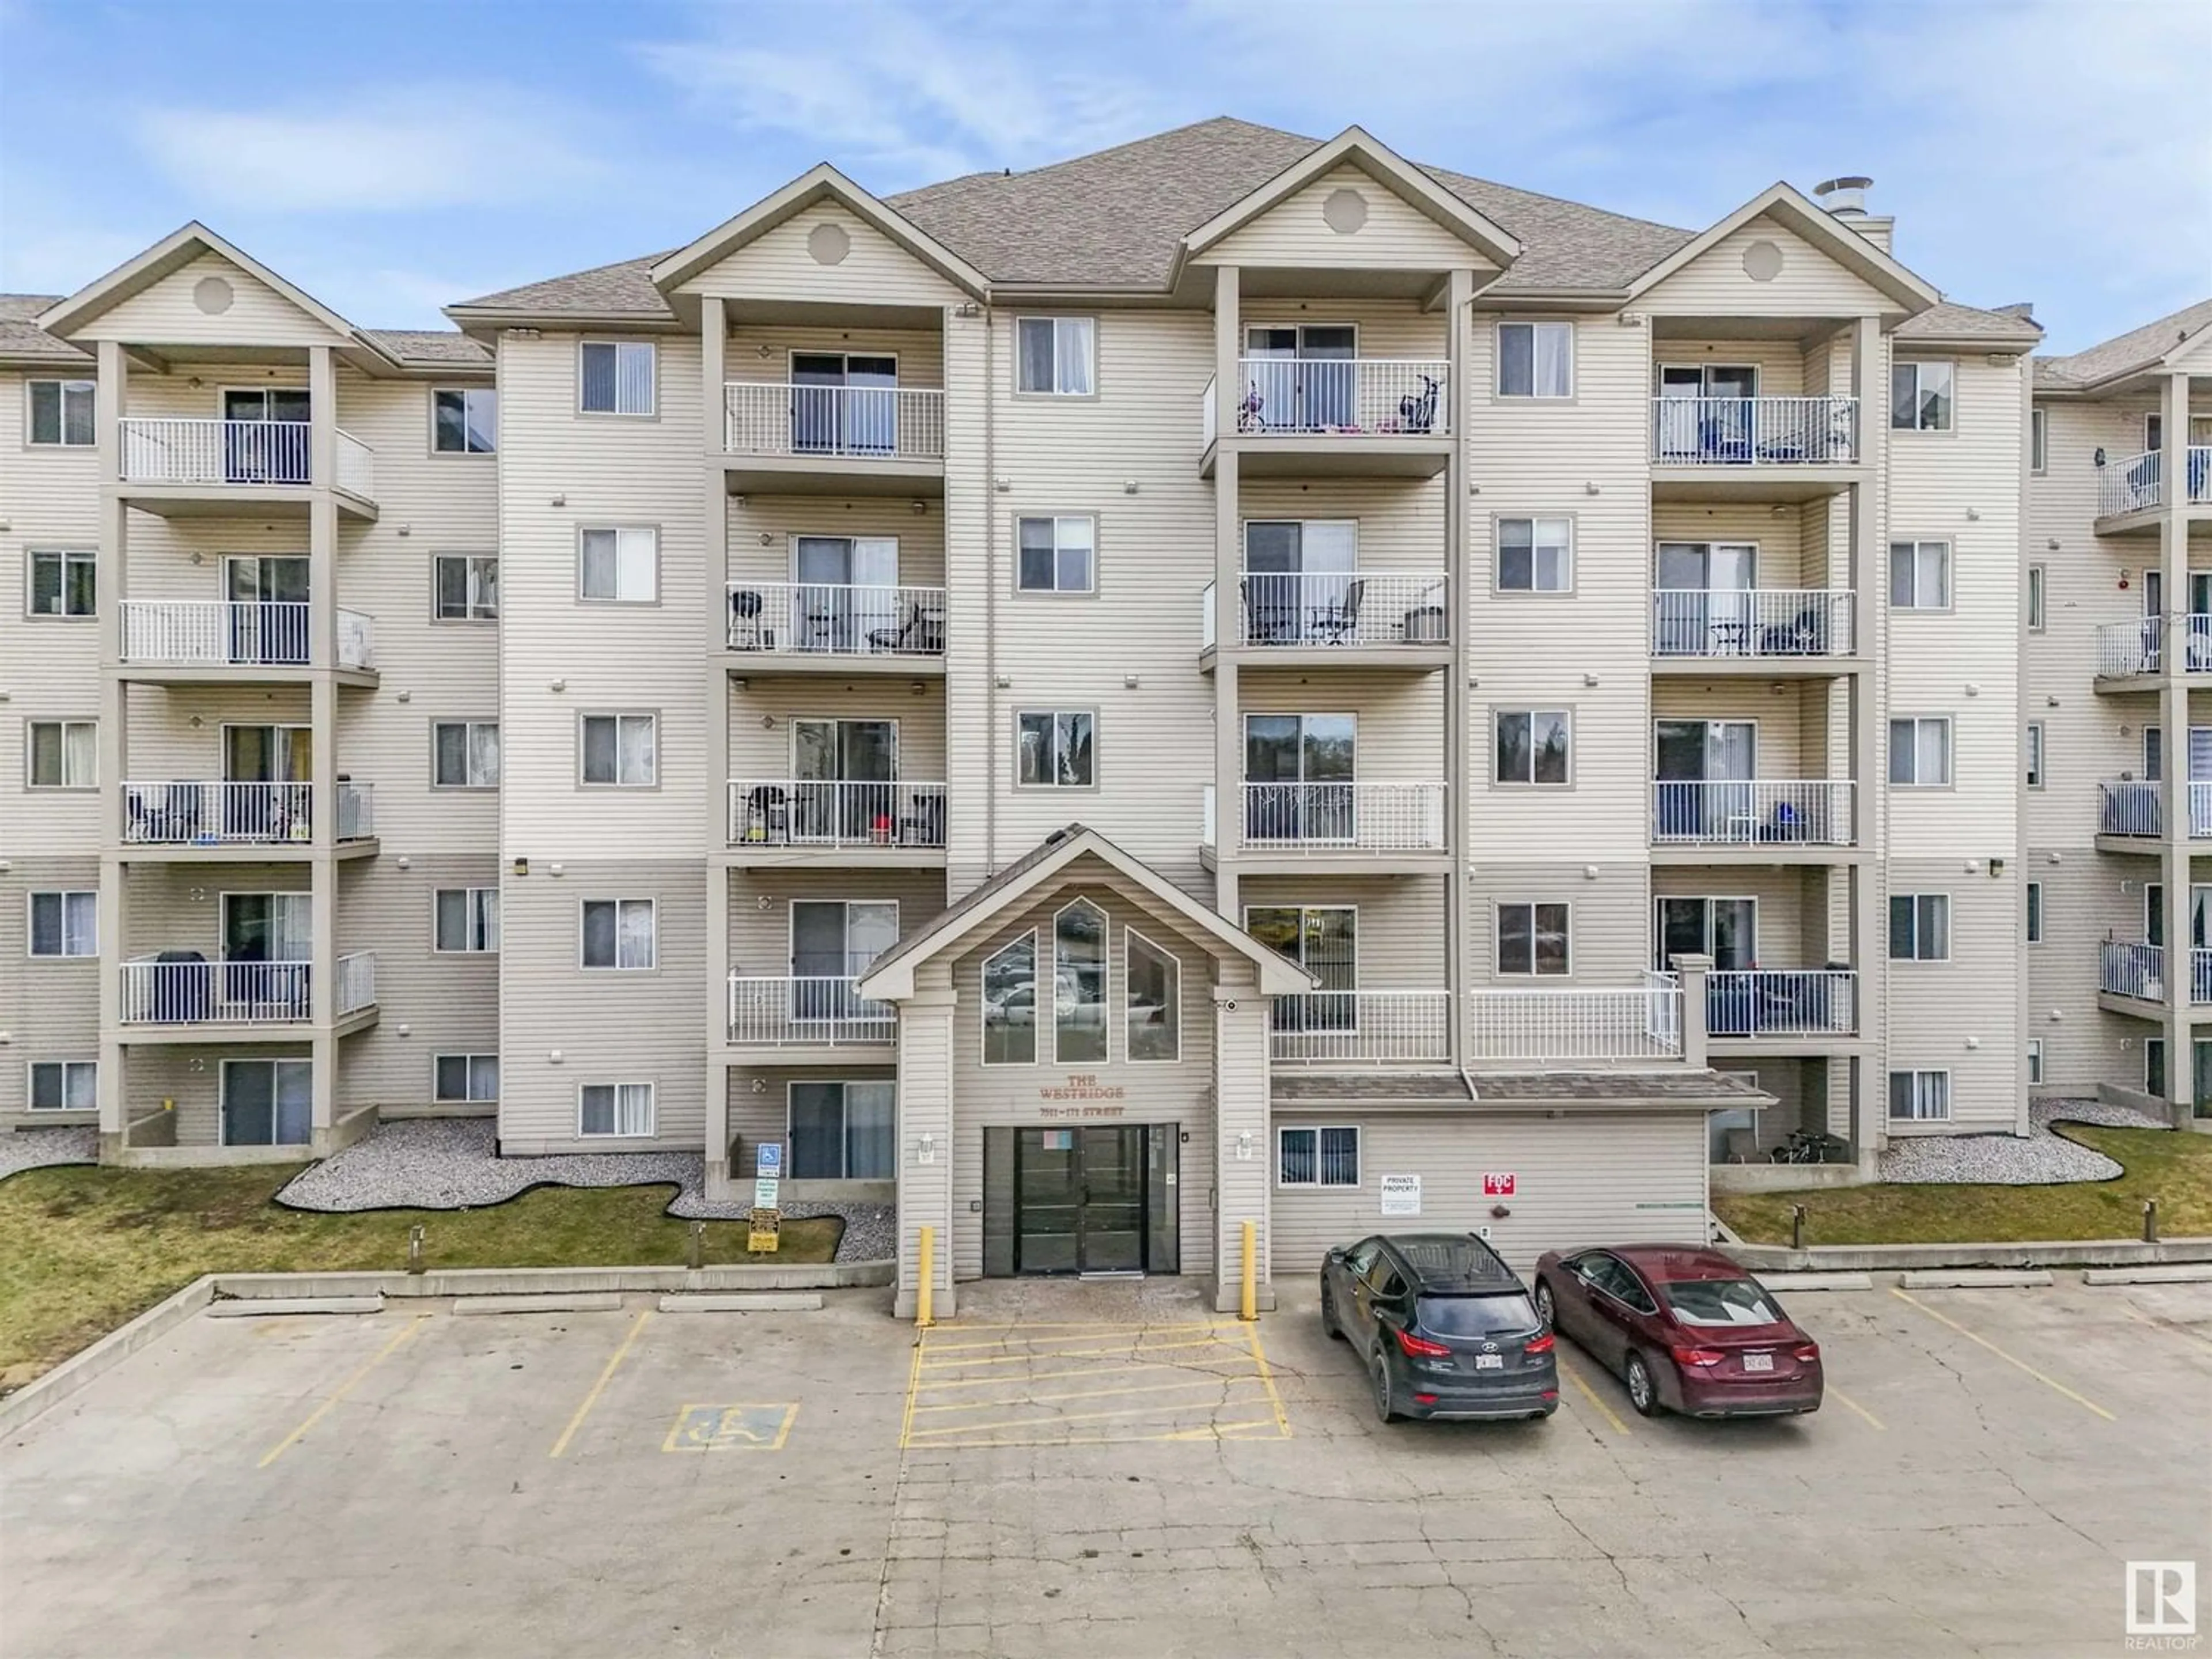 A pic from exterior of the house or condo for #418 7511 171 ST NW, Edmonton Alberta T5T6S7